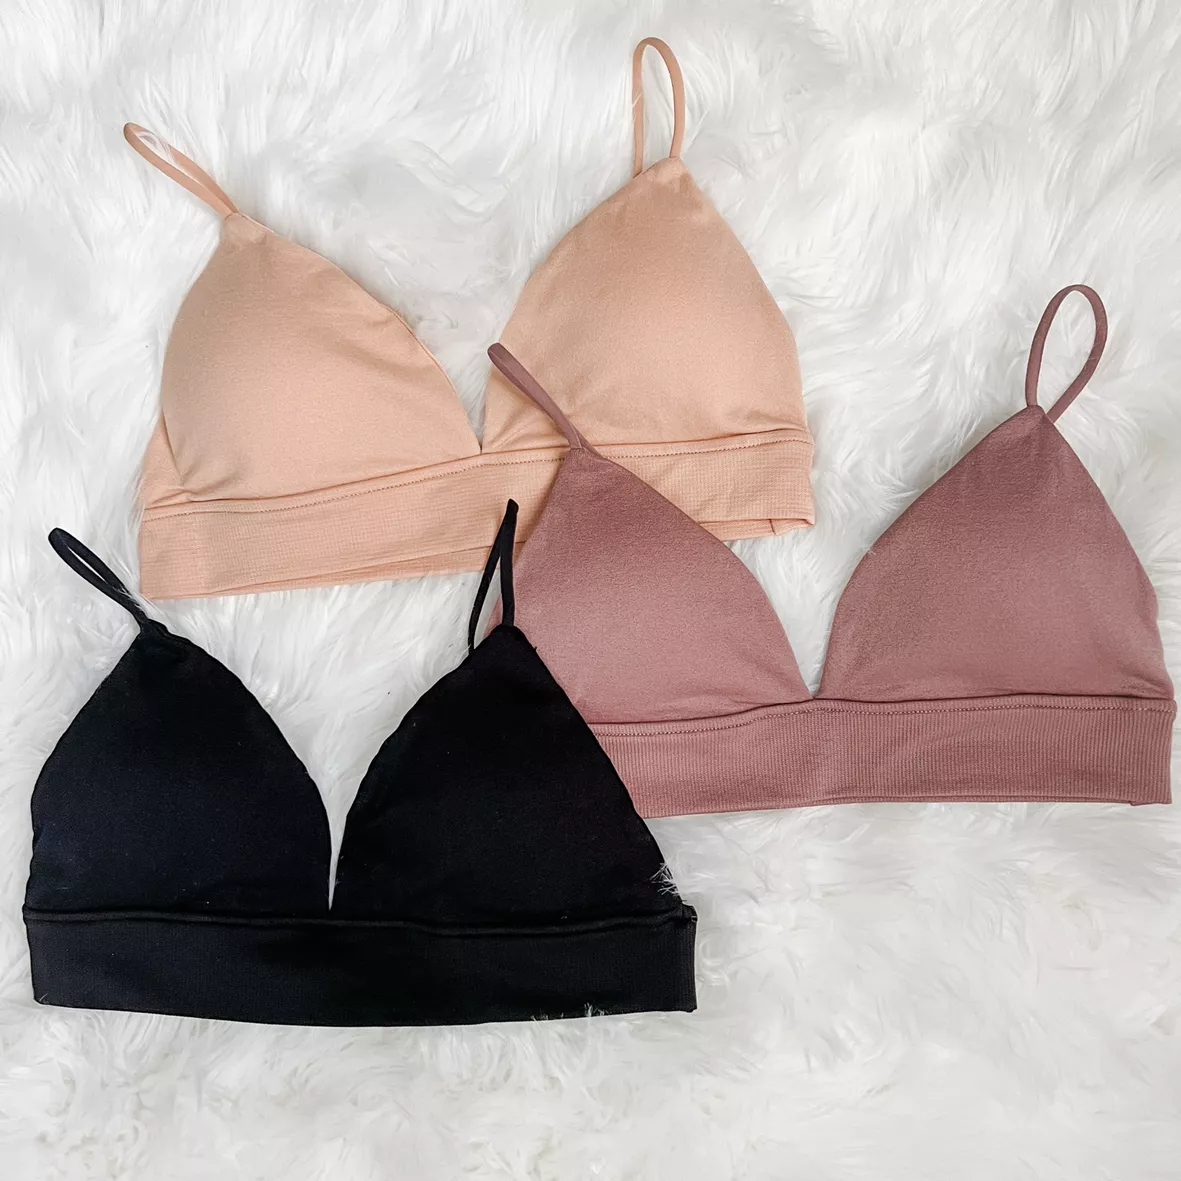 Buy INIBUD Bralette for Women Triangle Cups Removable Padded